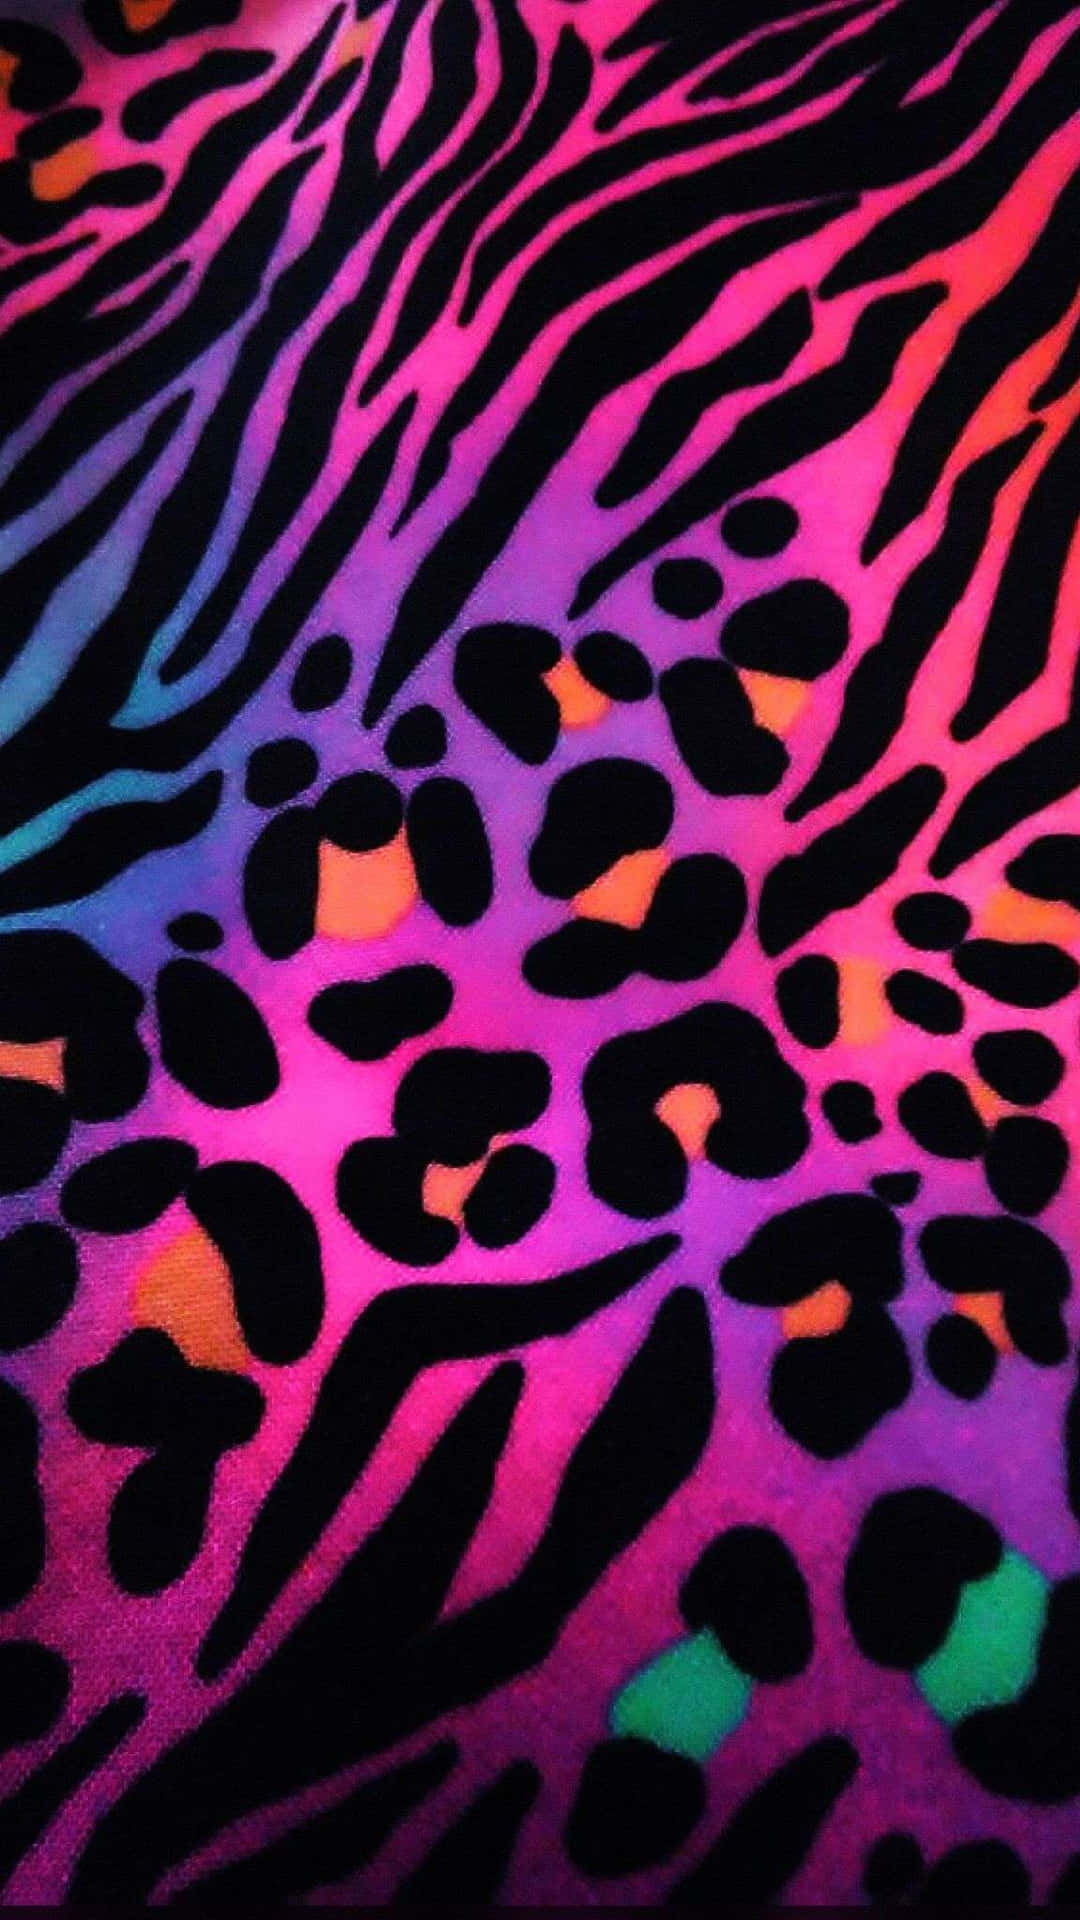 Explore your wild side with Glitter Leopard's bold and eye-catching fashion. Wallpaper